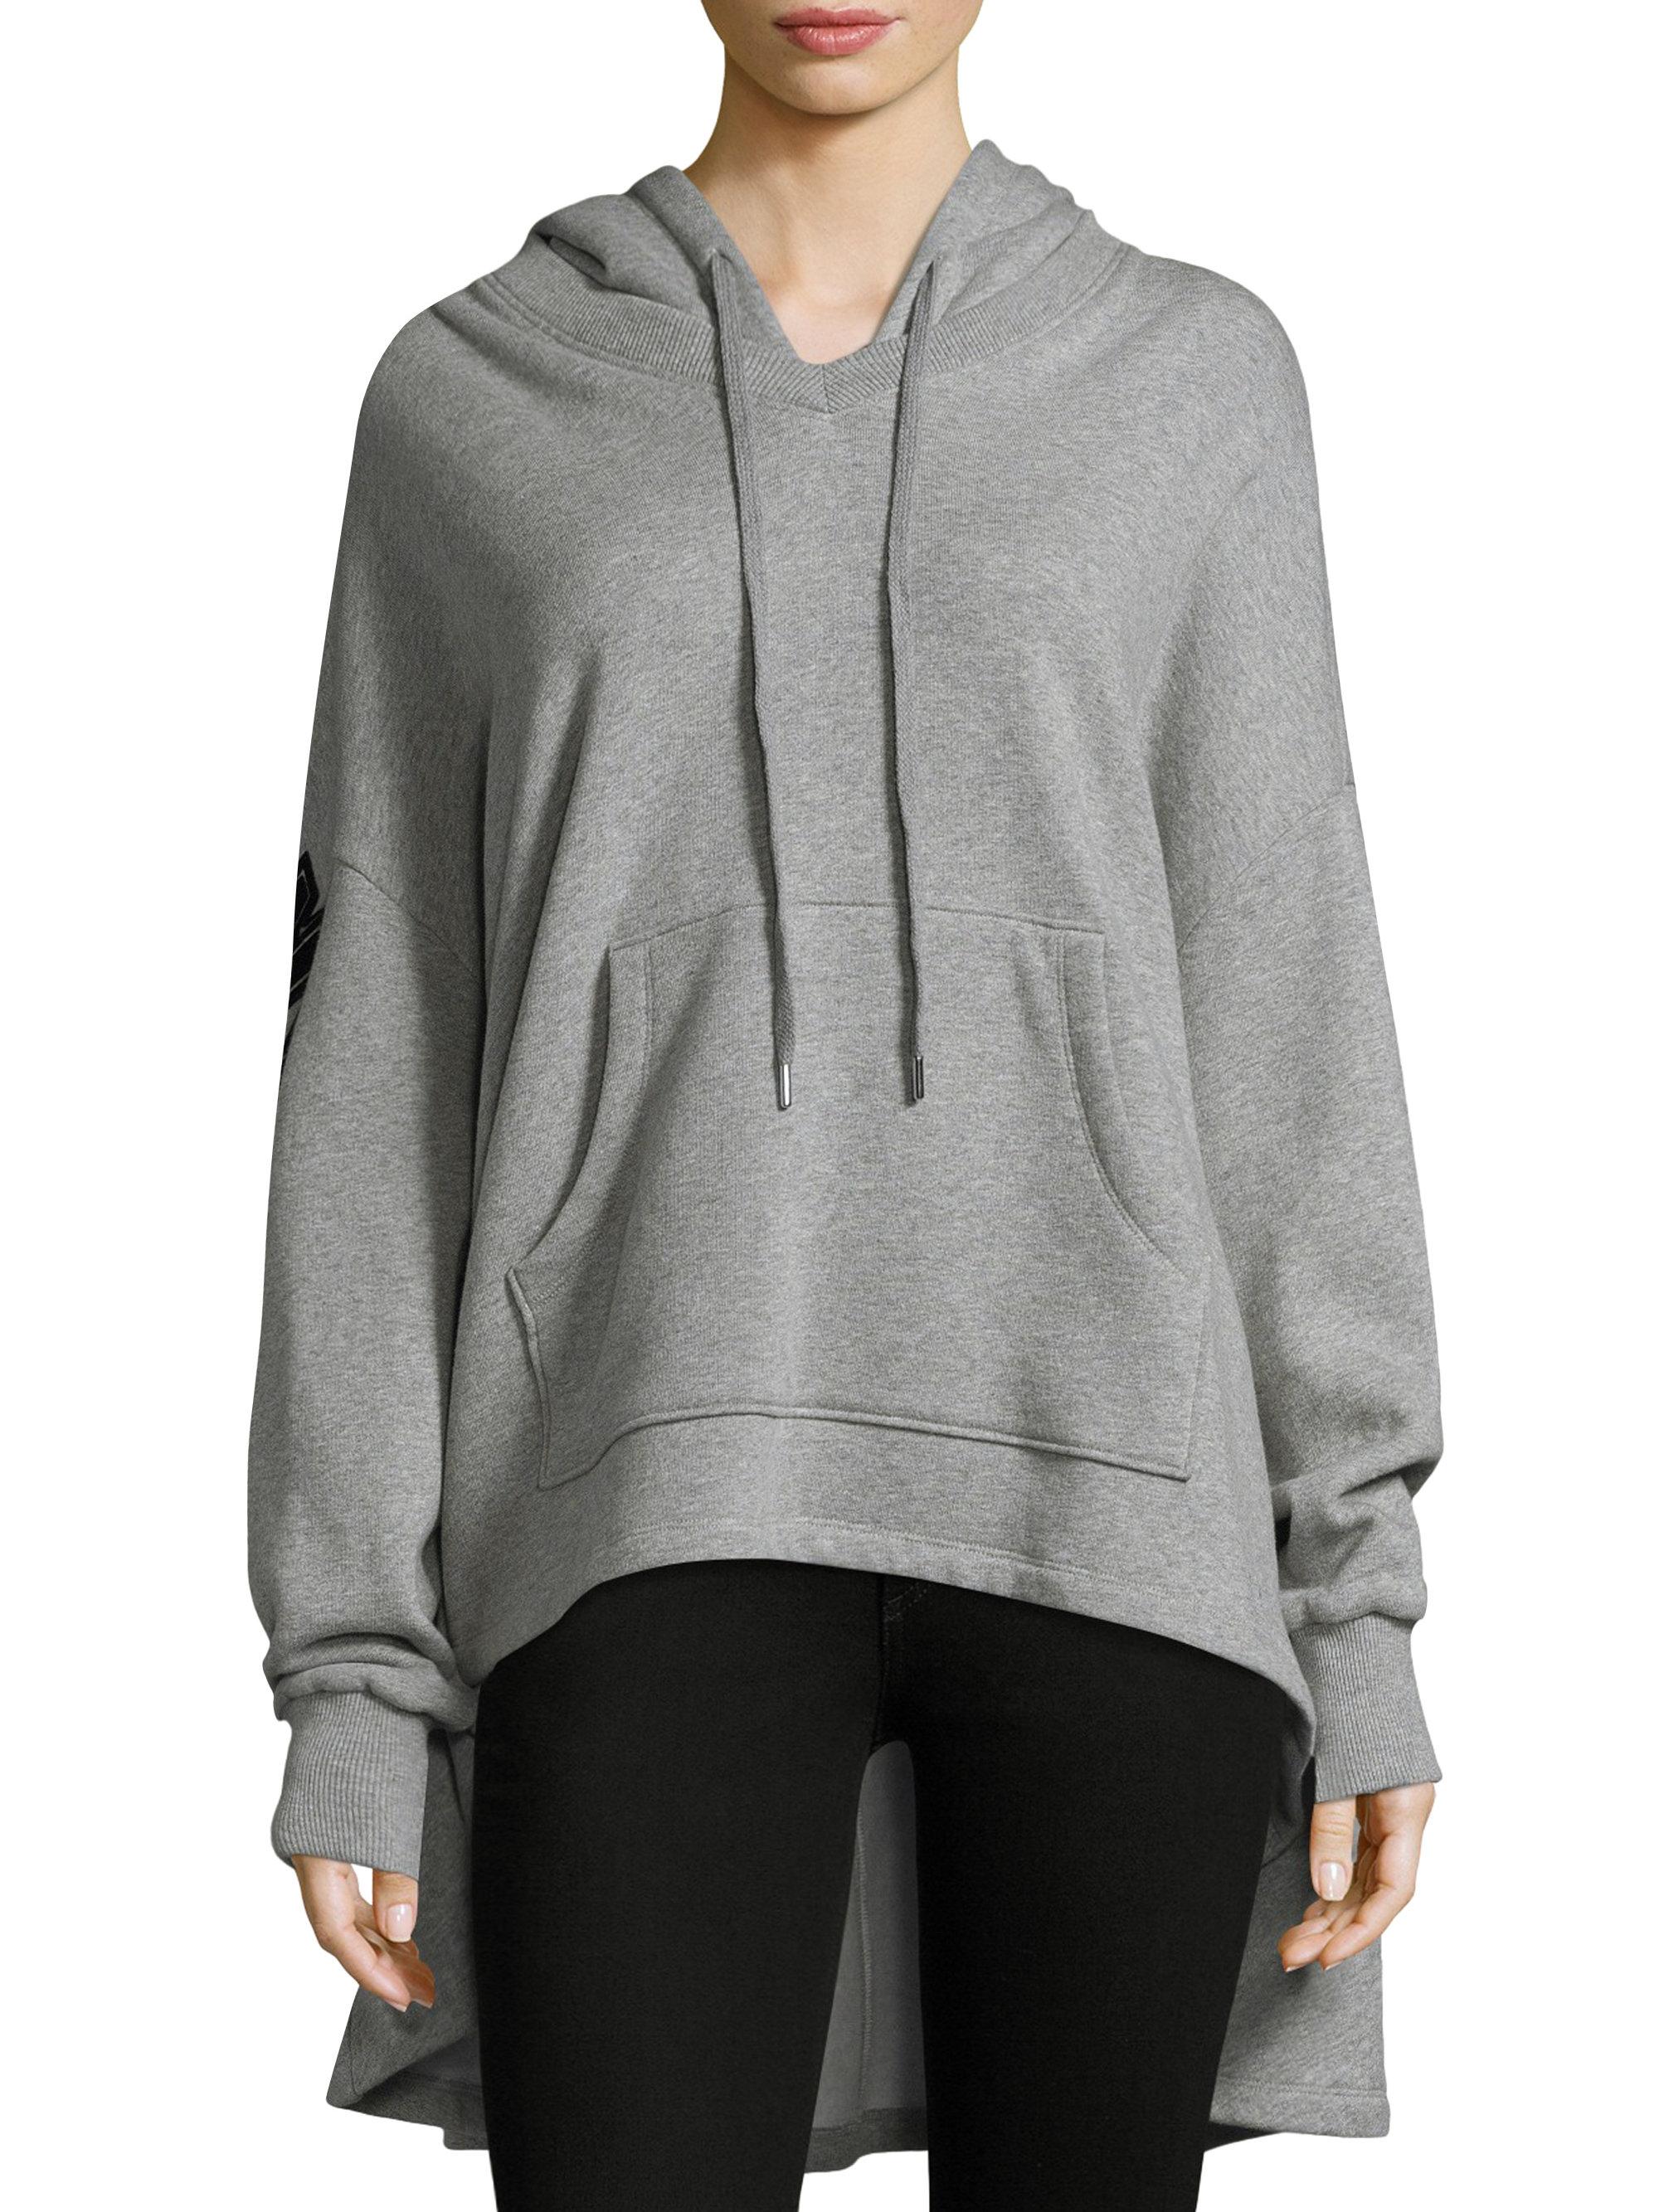 Lyst - Opening Ceremony Cotton Flocked Poncho Hoodie in Gray